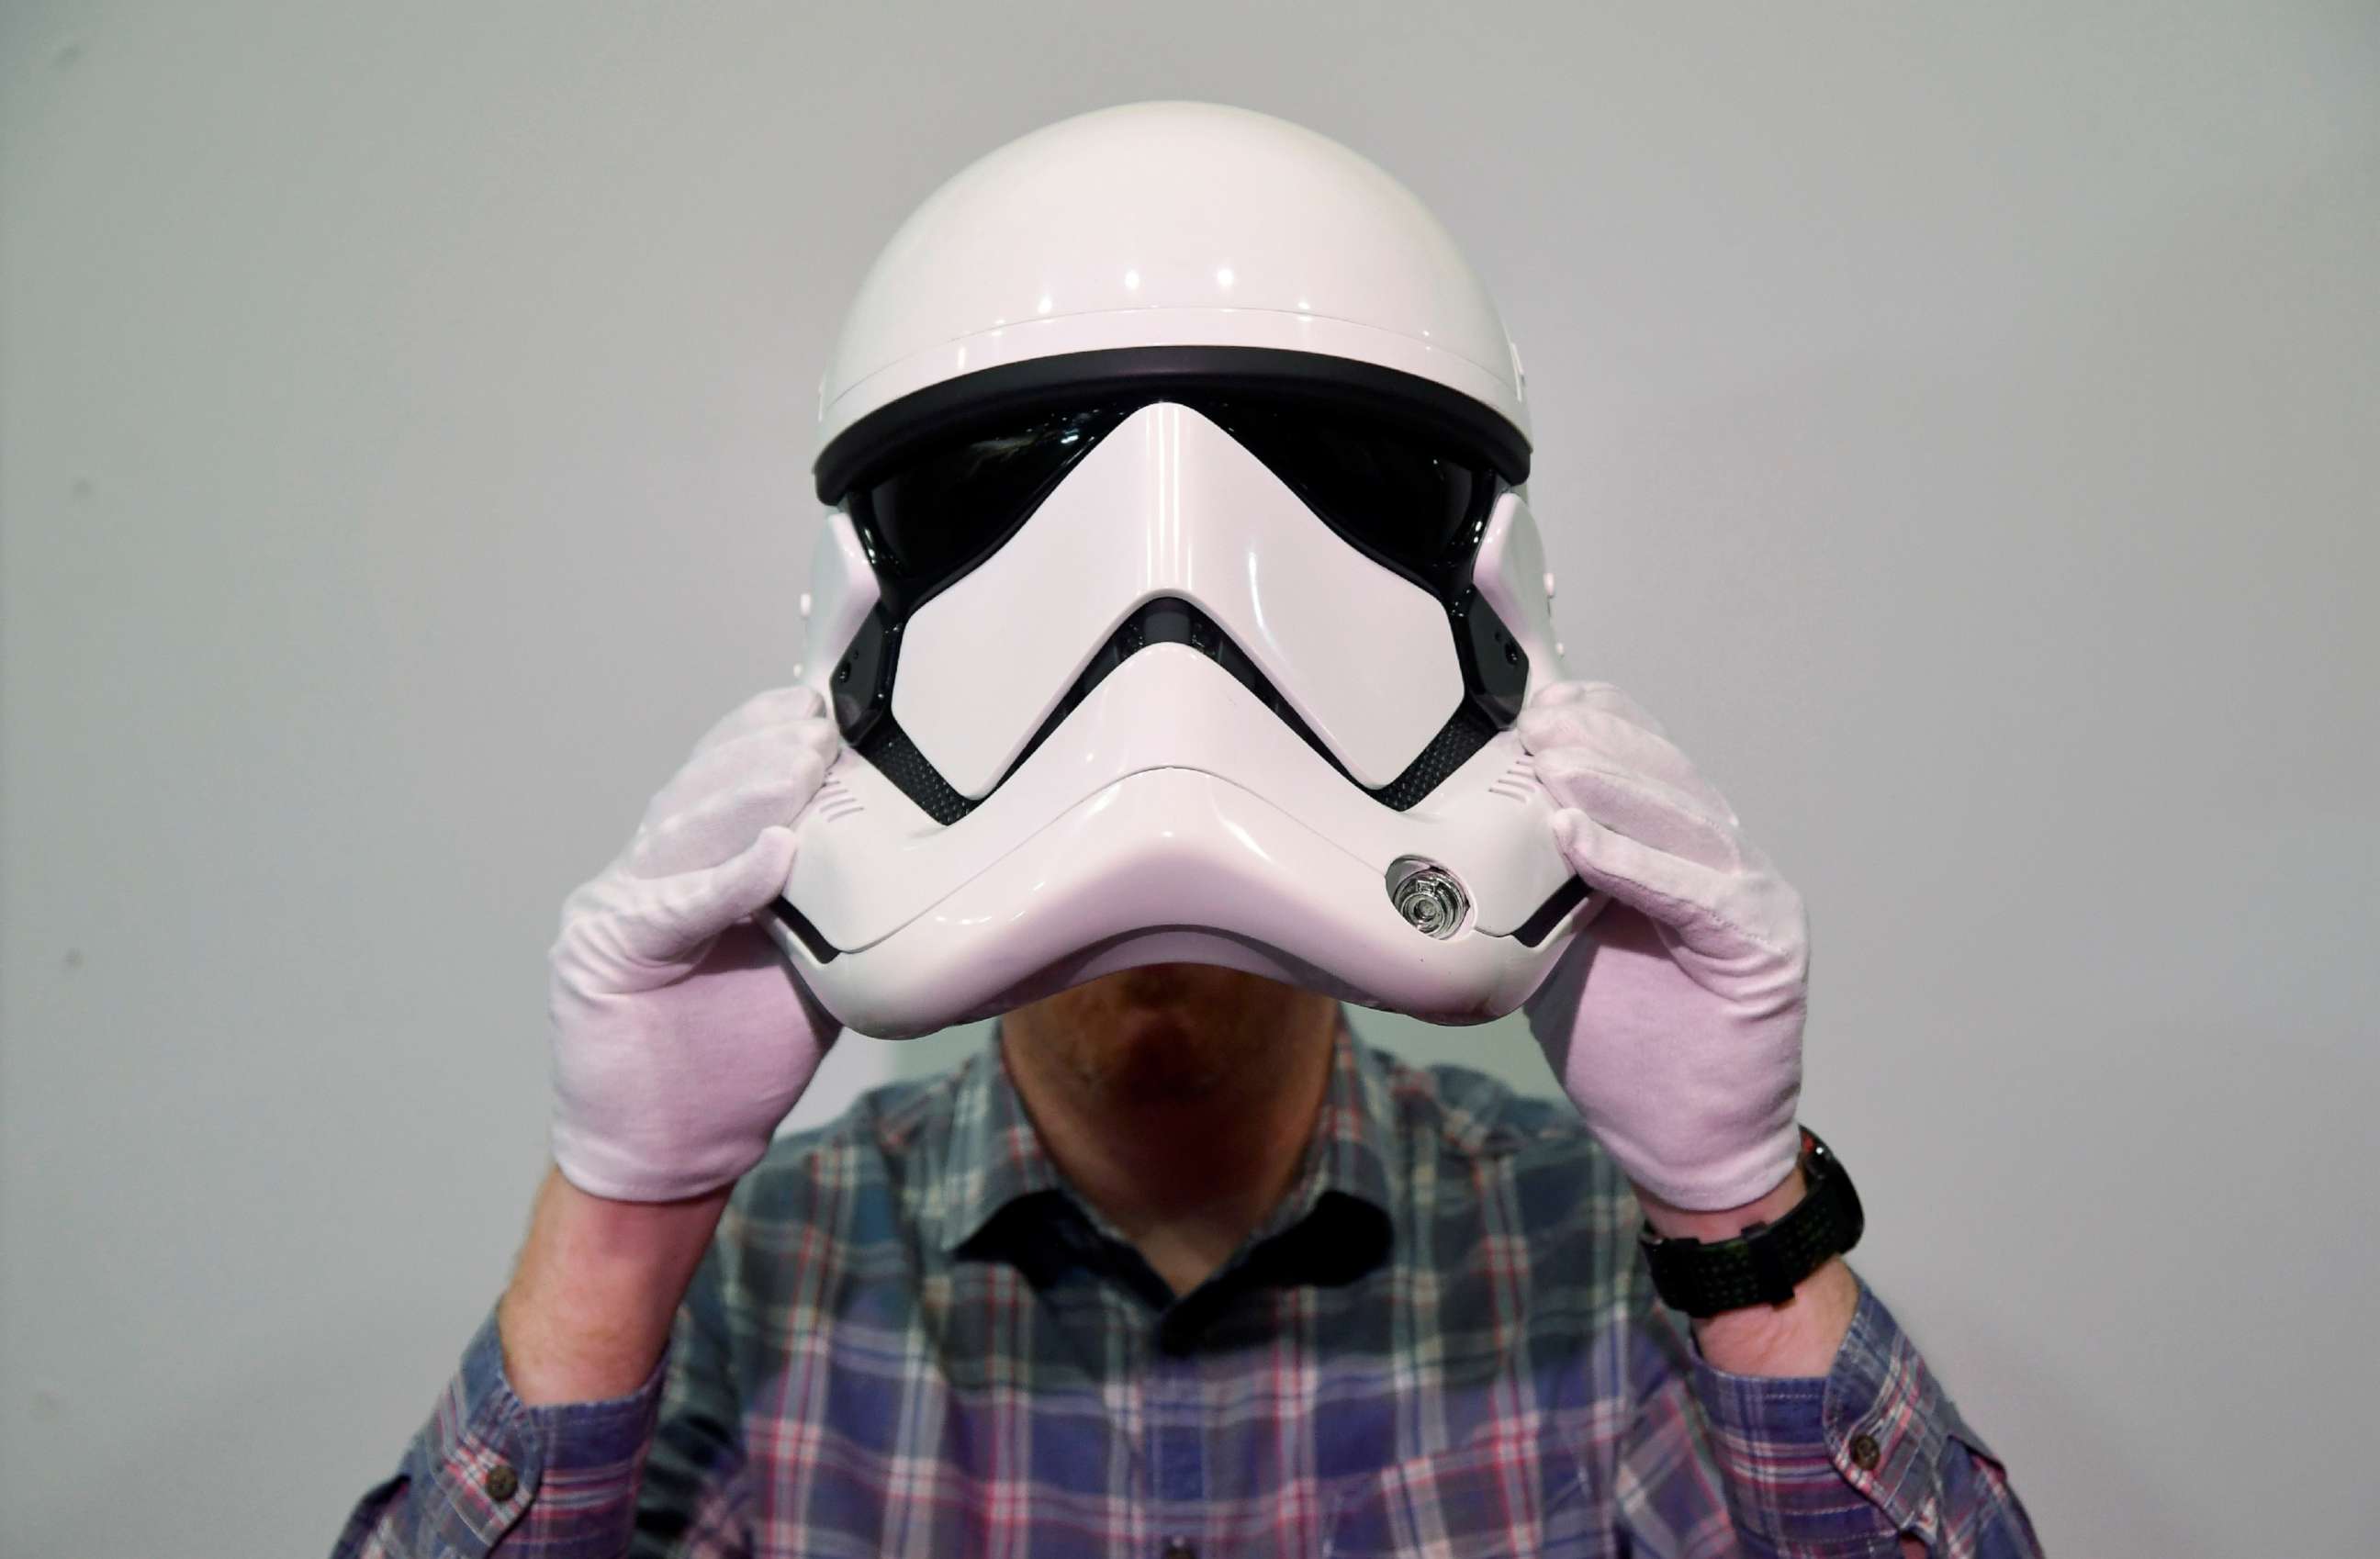 PHOTO: An employee poses with a Stormtrooper helmet from the 2017 film Star Wars: The last Jedi,  on display at the IMAX ahead of being auctioned in London, Sept. 6, 2018.